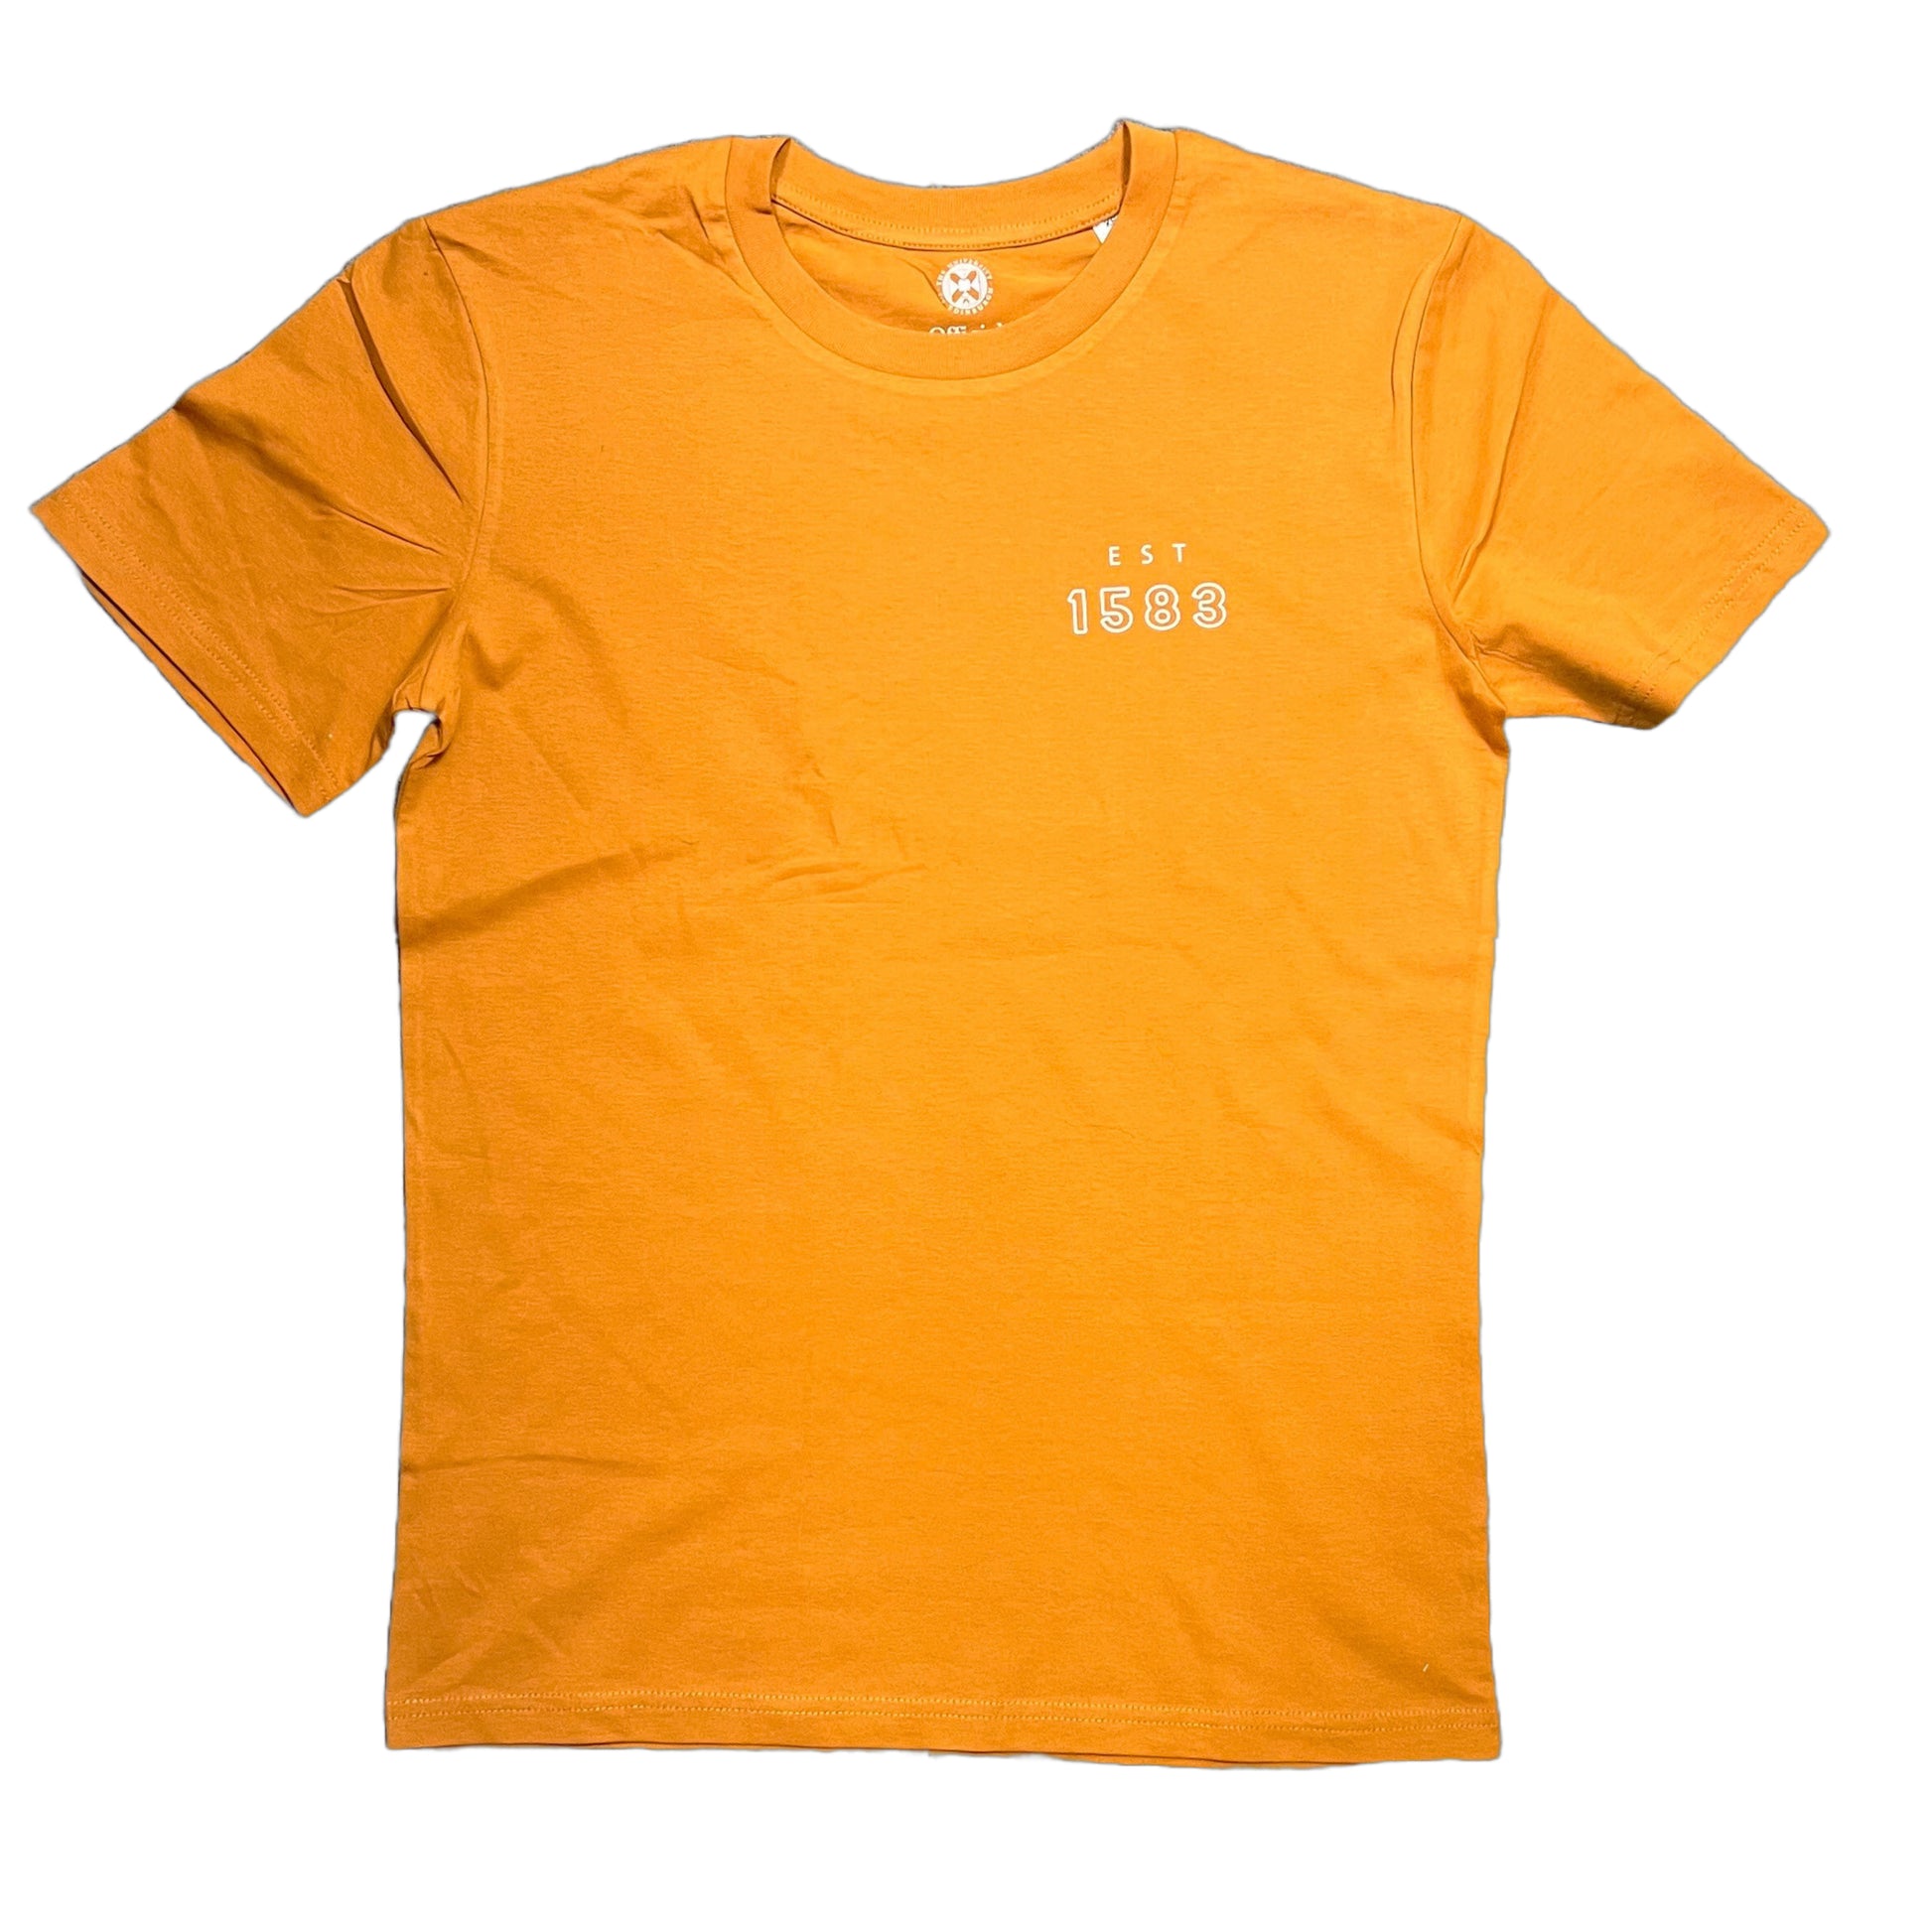 Teviot Row House Coordinates T-Shirt in Burnt Orange. Image shows front design of 'EST 1583' in small text.